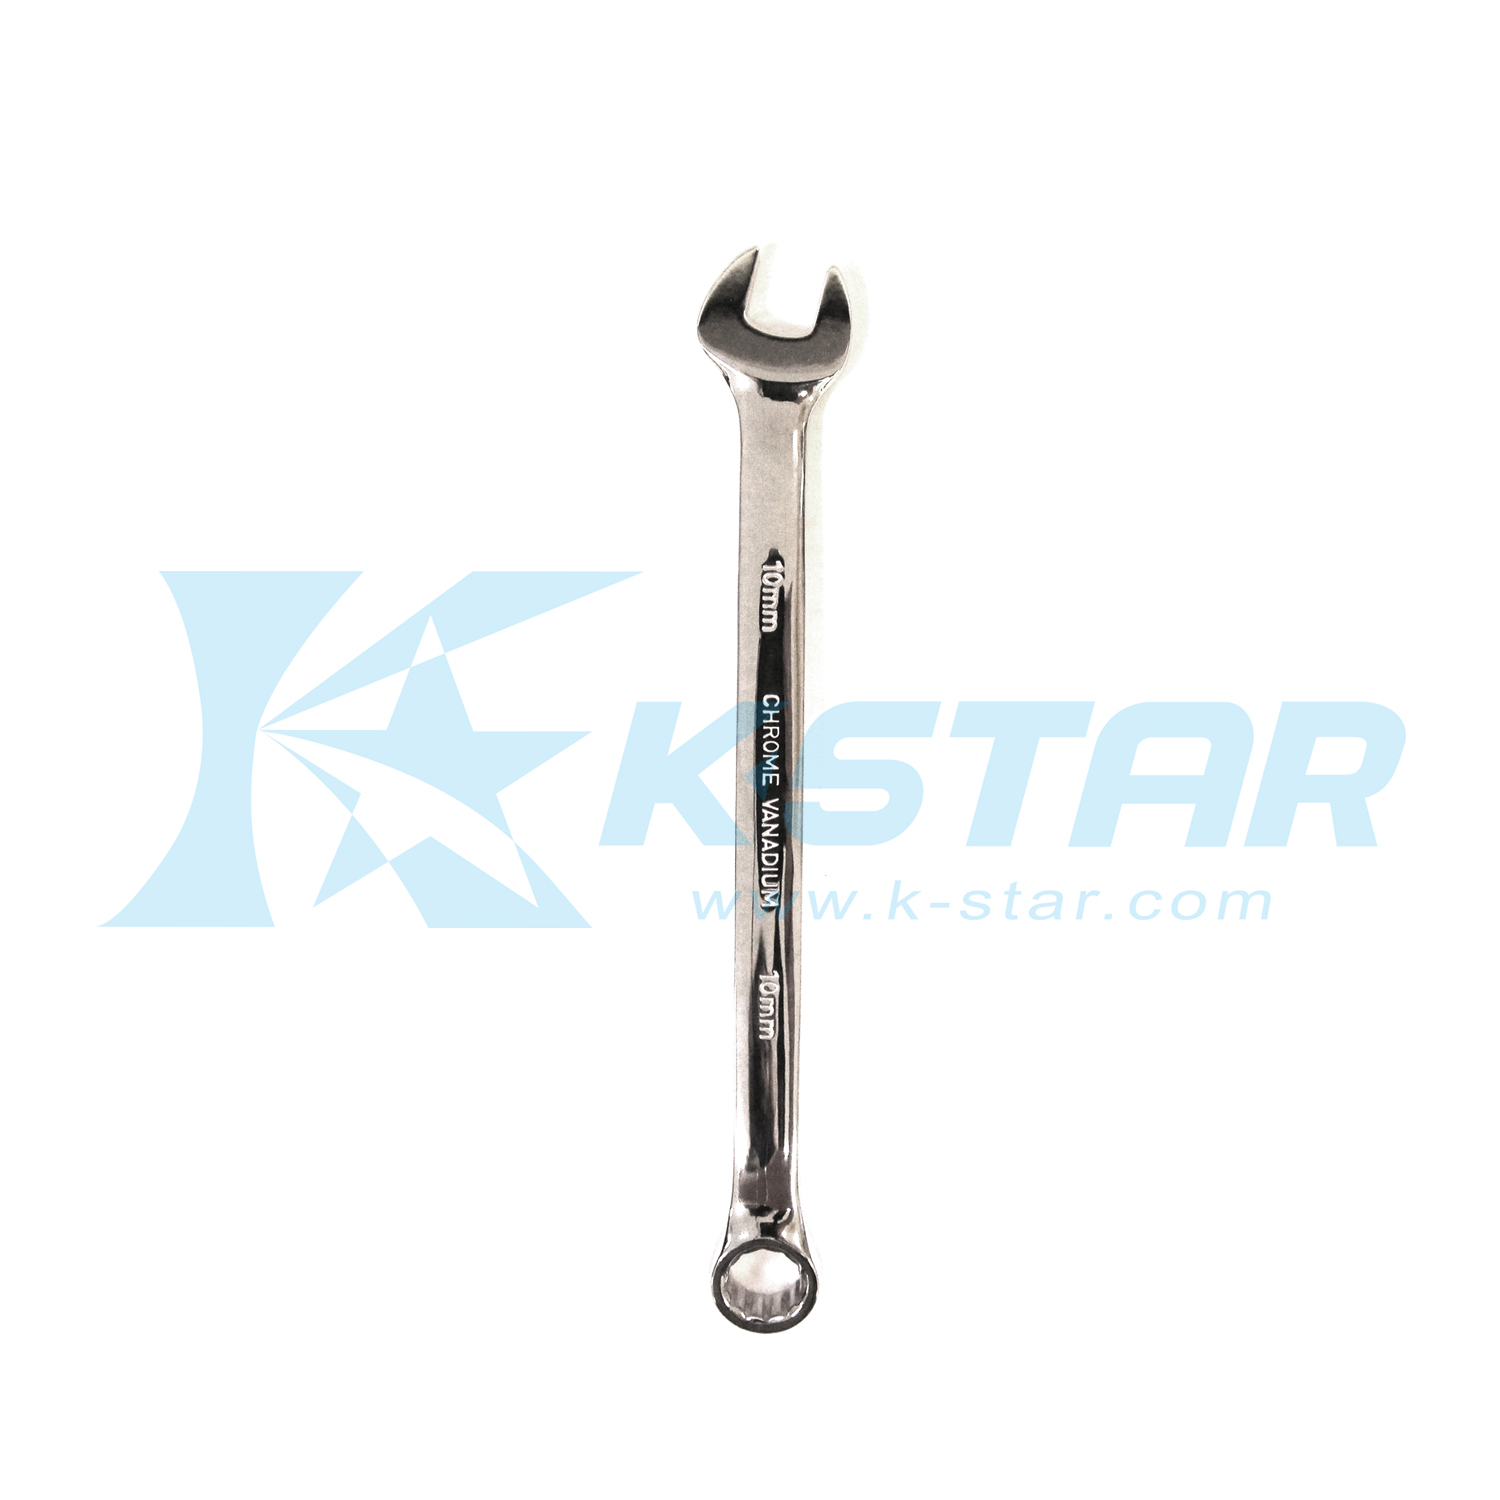 PR COMBINATION WRENCH 3/8"